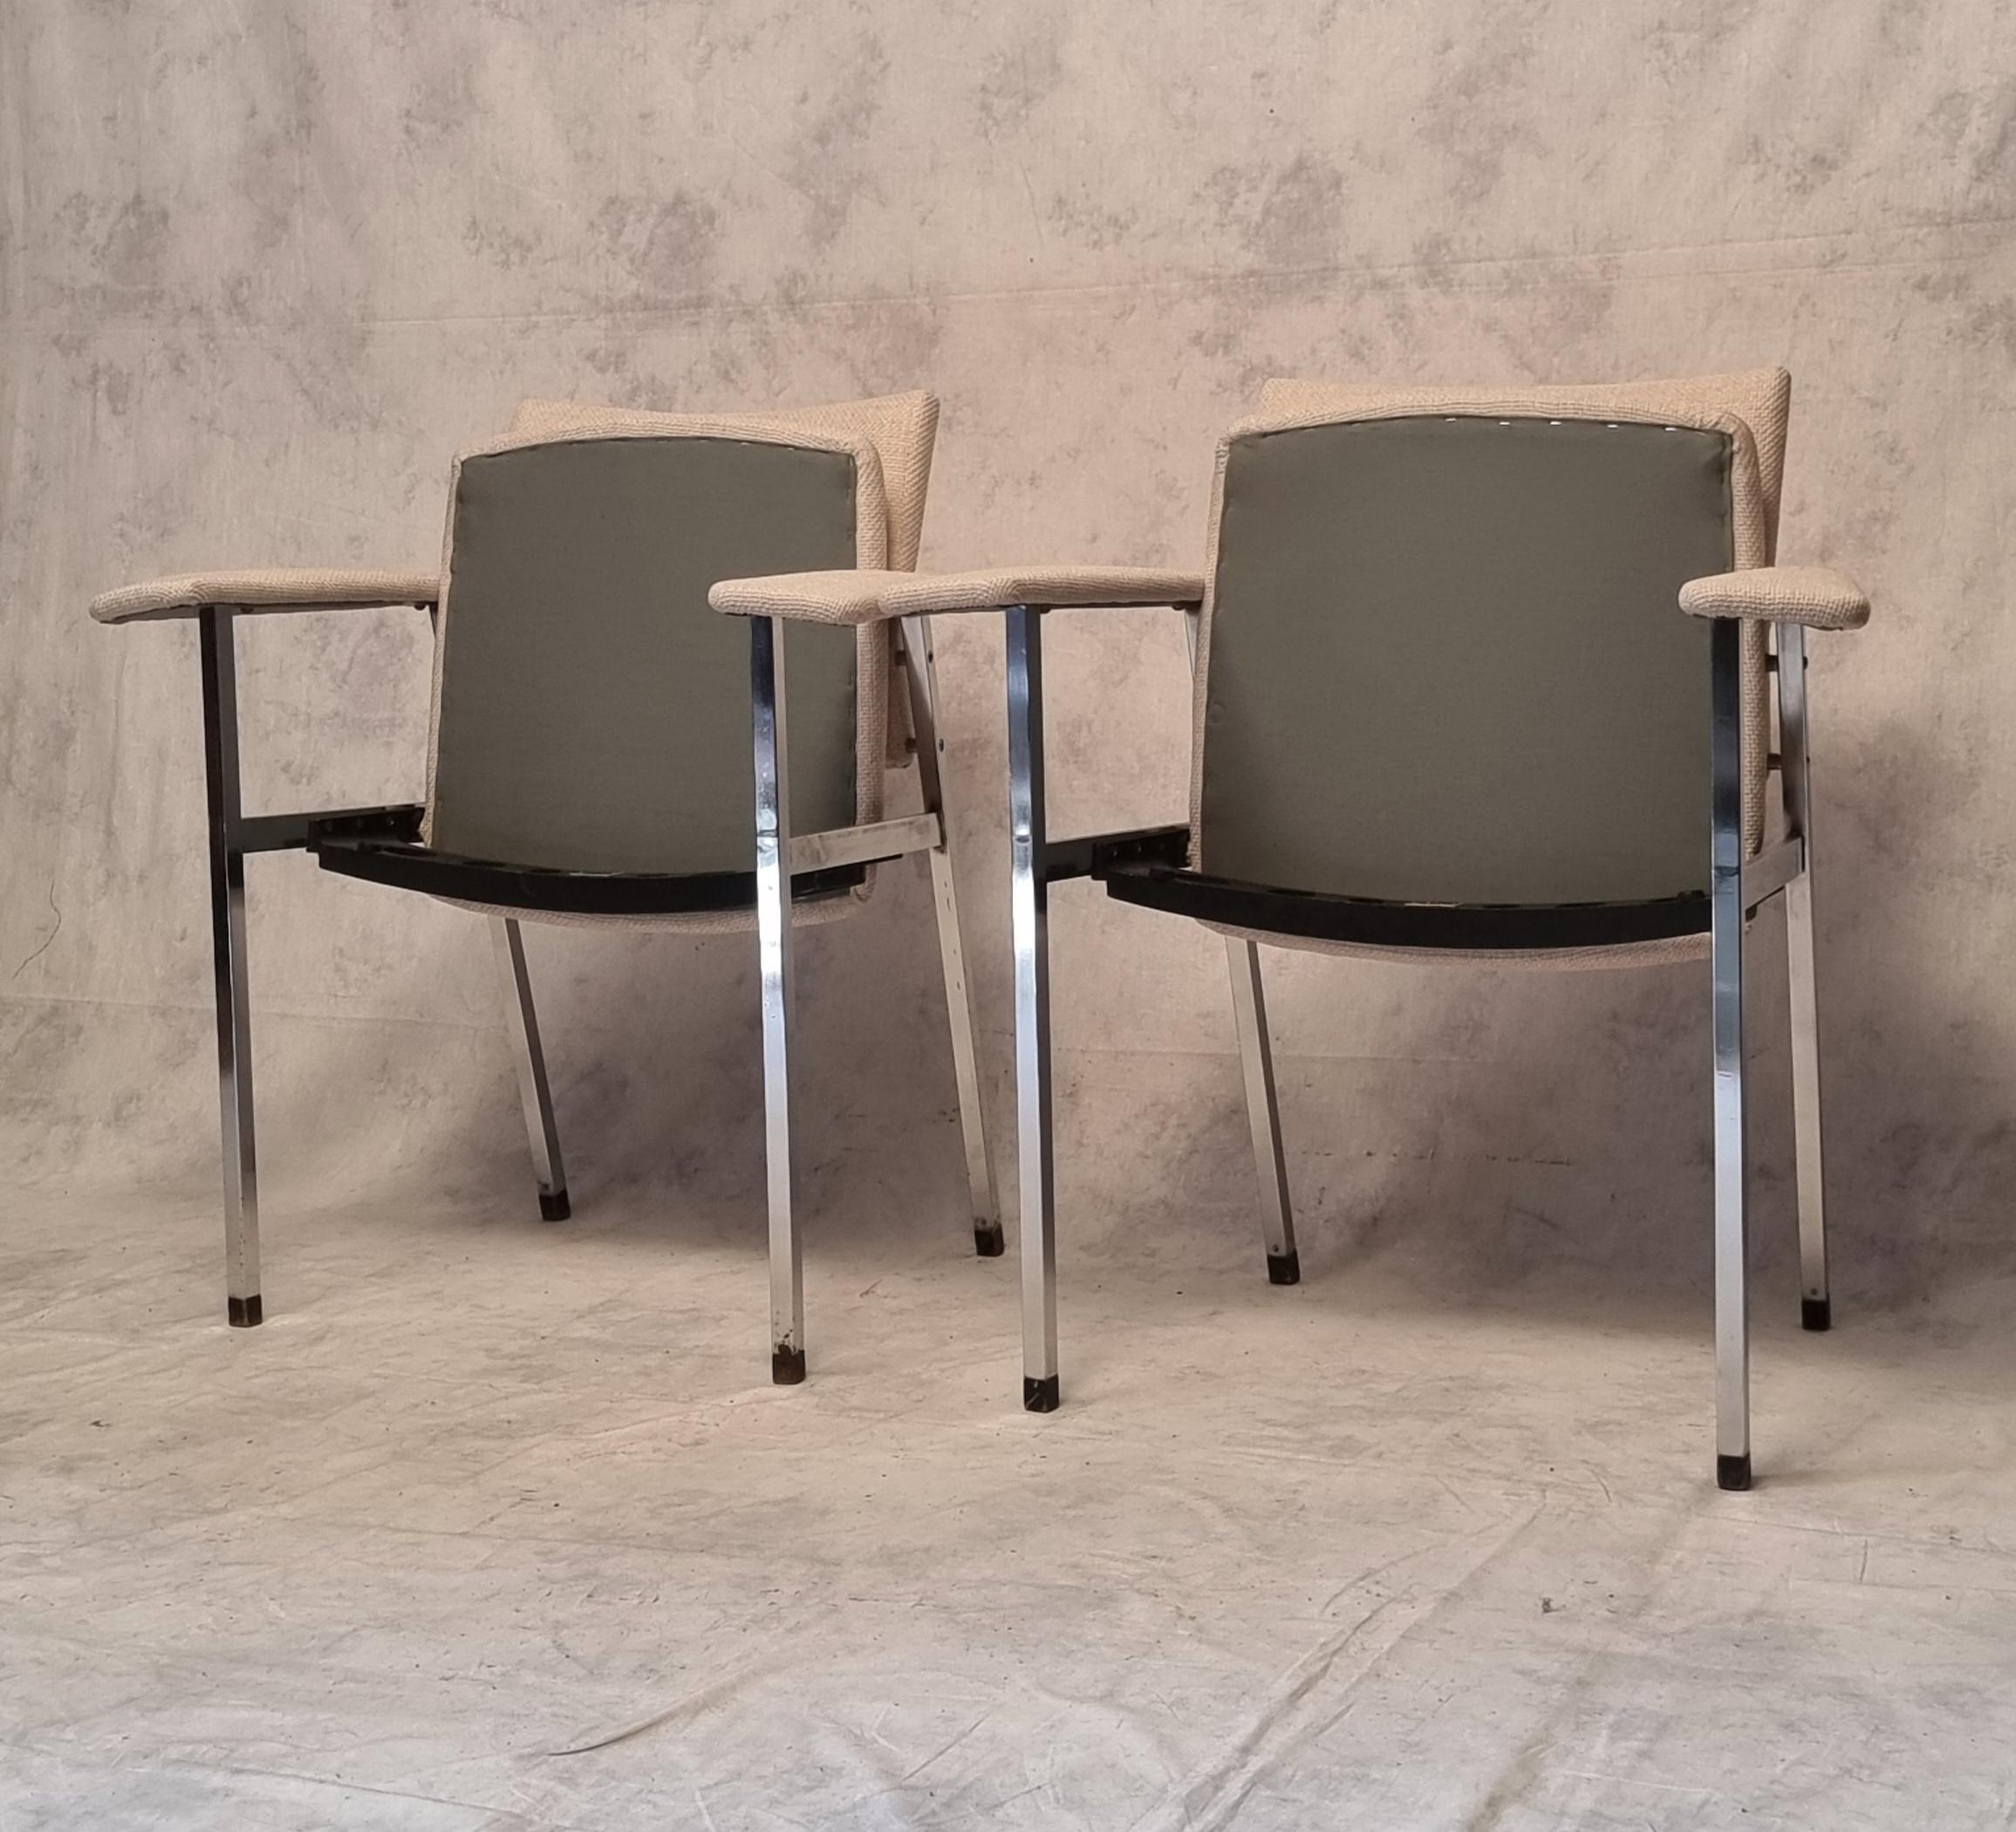 Very rare pair of Danish Fritz Hansen armchairs dating from the 1970s. This pair of jump seat armchairs is undoubtedly from a theatre, cinema or opera. Indeed the seat folds down and reveals a seat number as is frequently found in theaters or opera